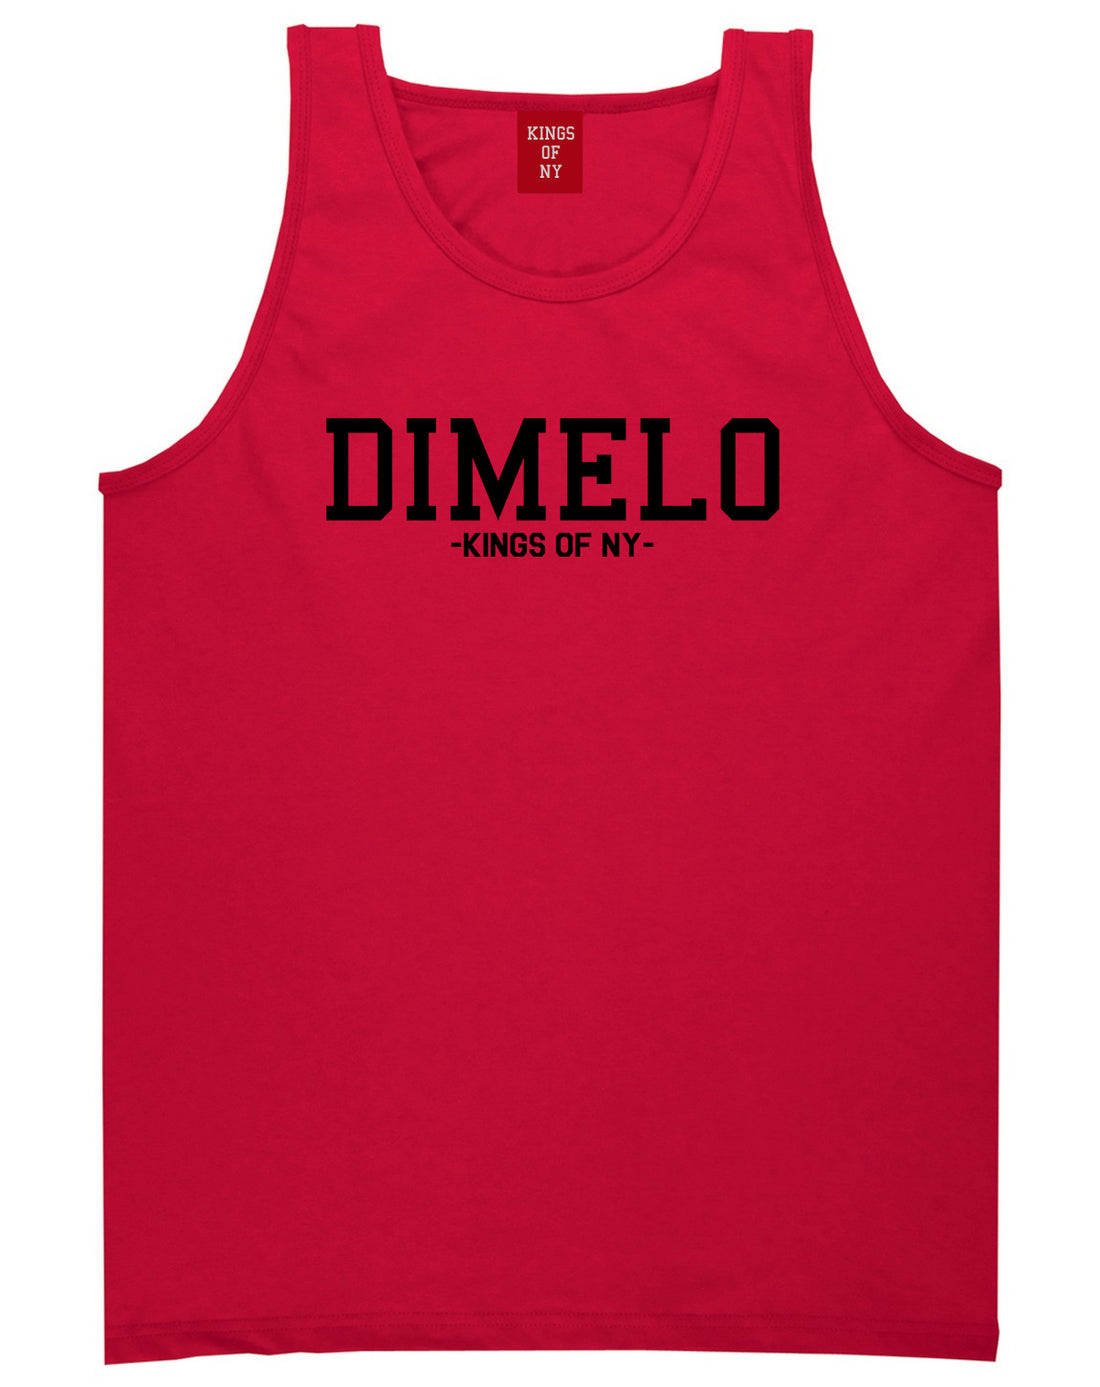 Dimelo Kings Of NY Tank Top Shirt in Red